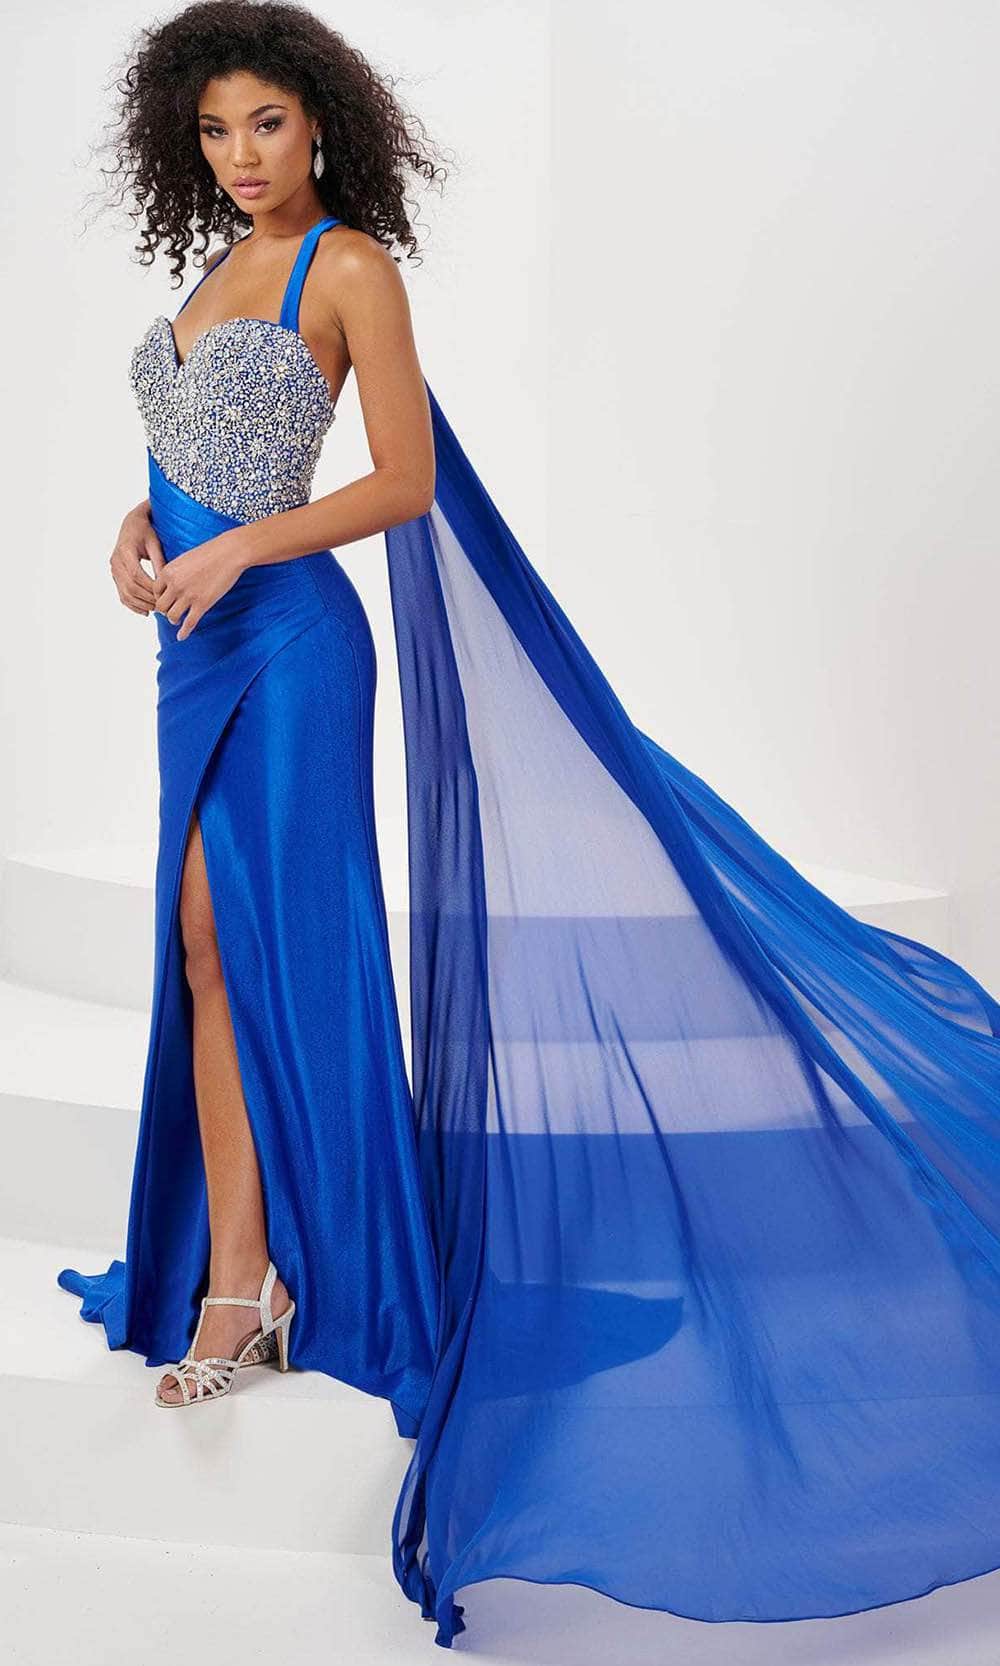 Panoply 14175 - Sweetheart Evening Gown with Slit Evening Dresses 0 / Royal